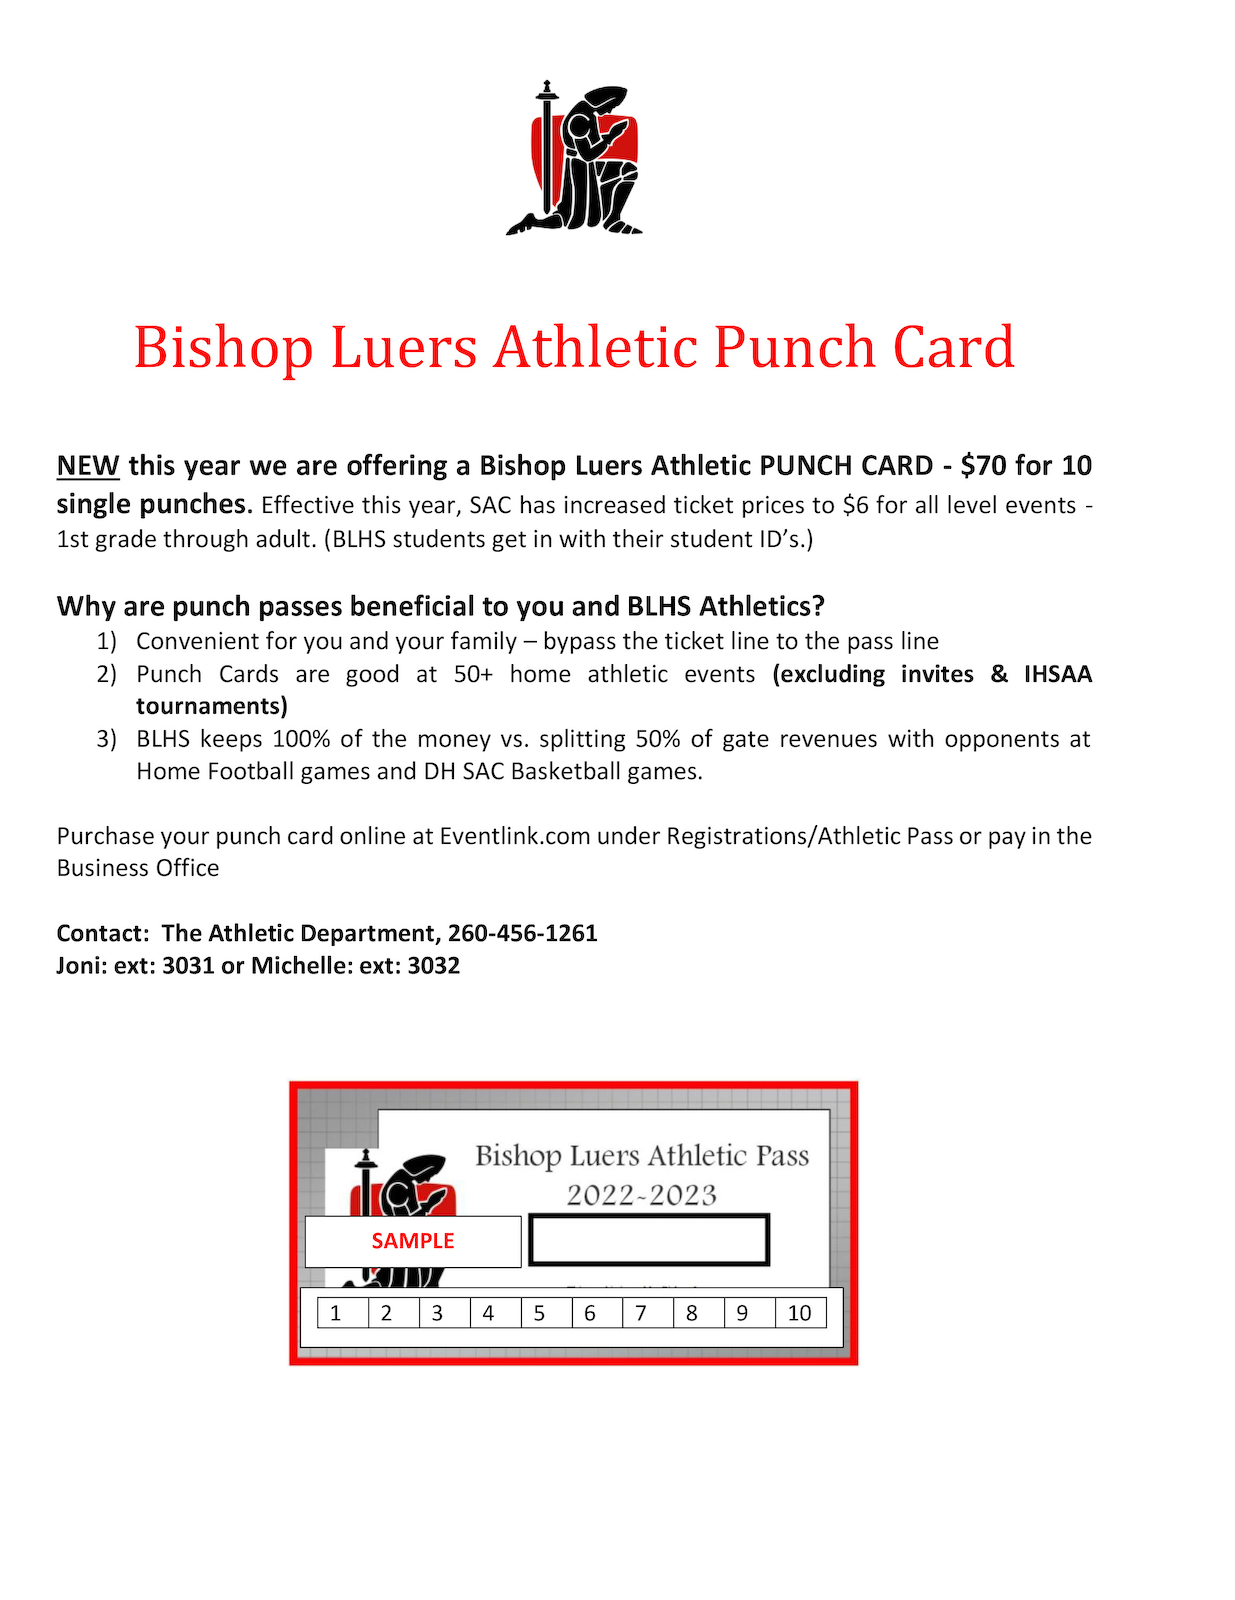 Punch Card 2022 (1).png